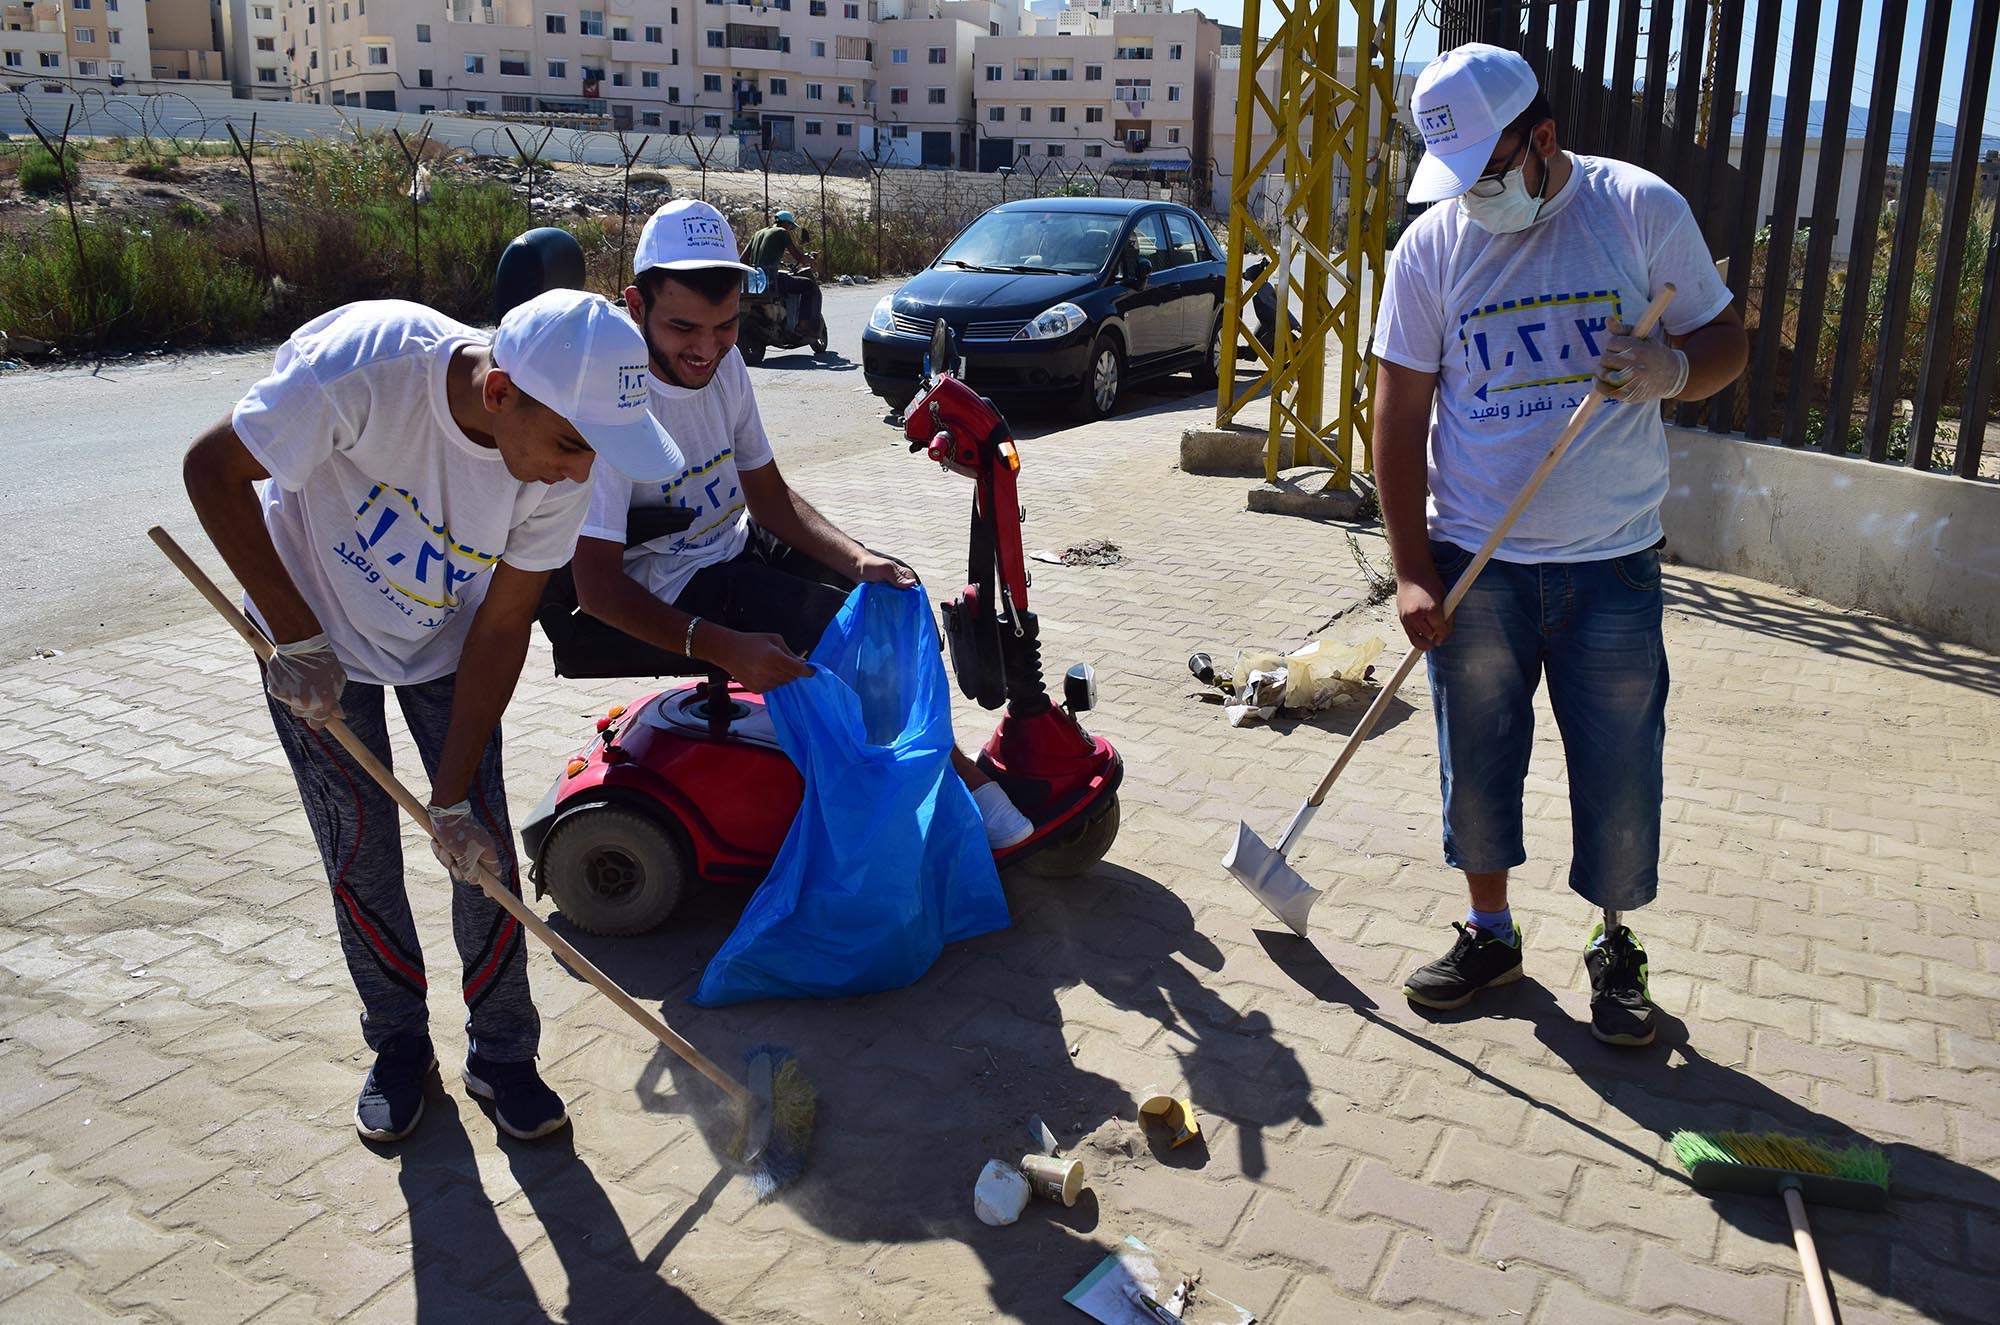 Refugee youth participate in Anera's solid waste management project in Lebanon.